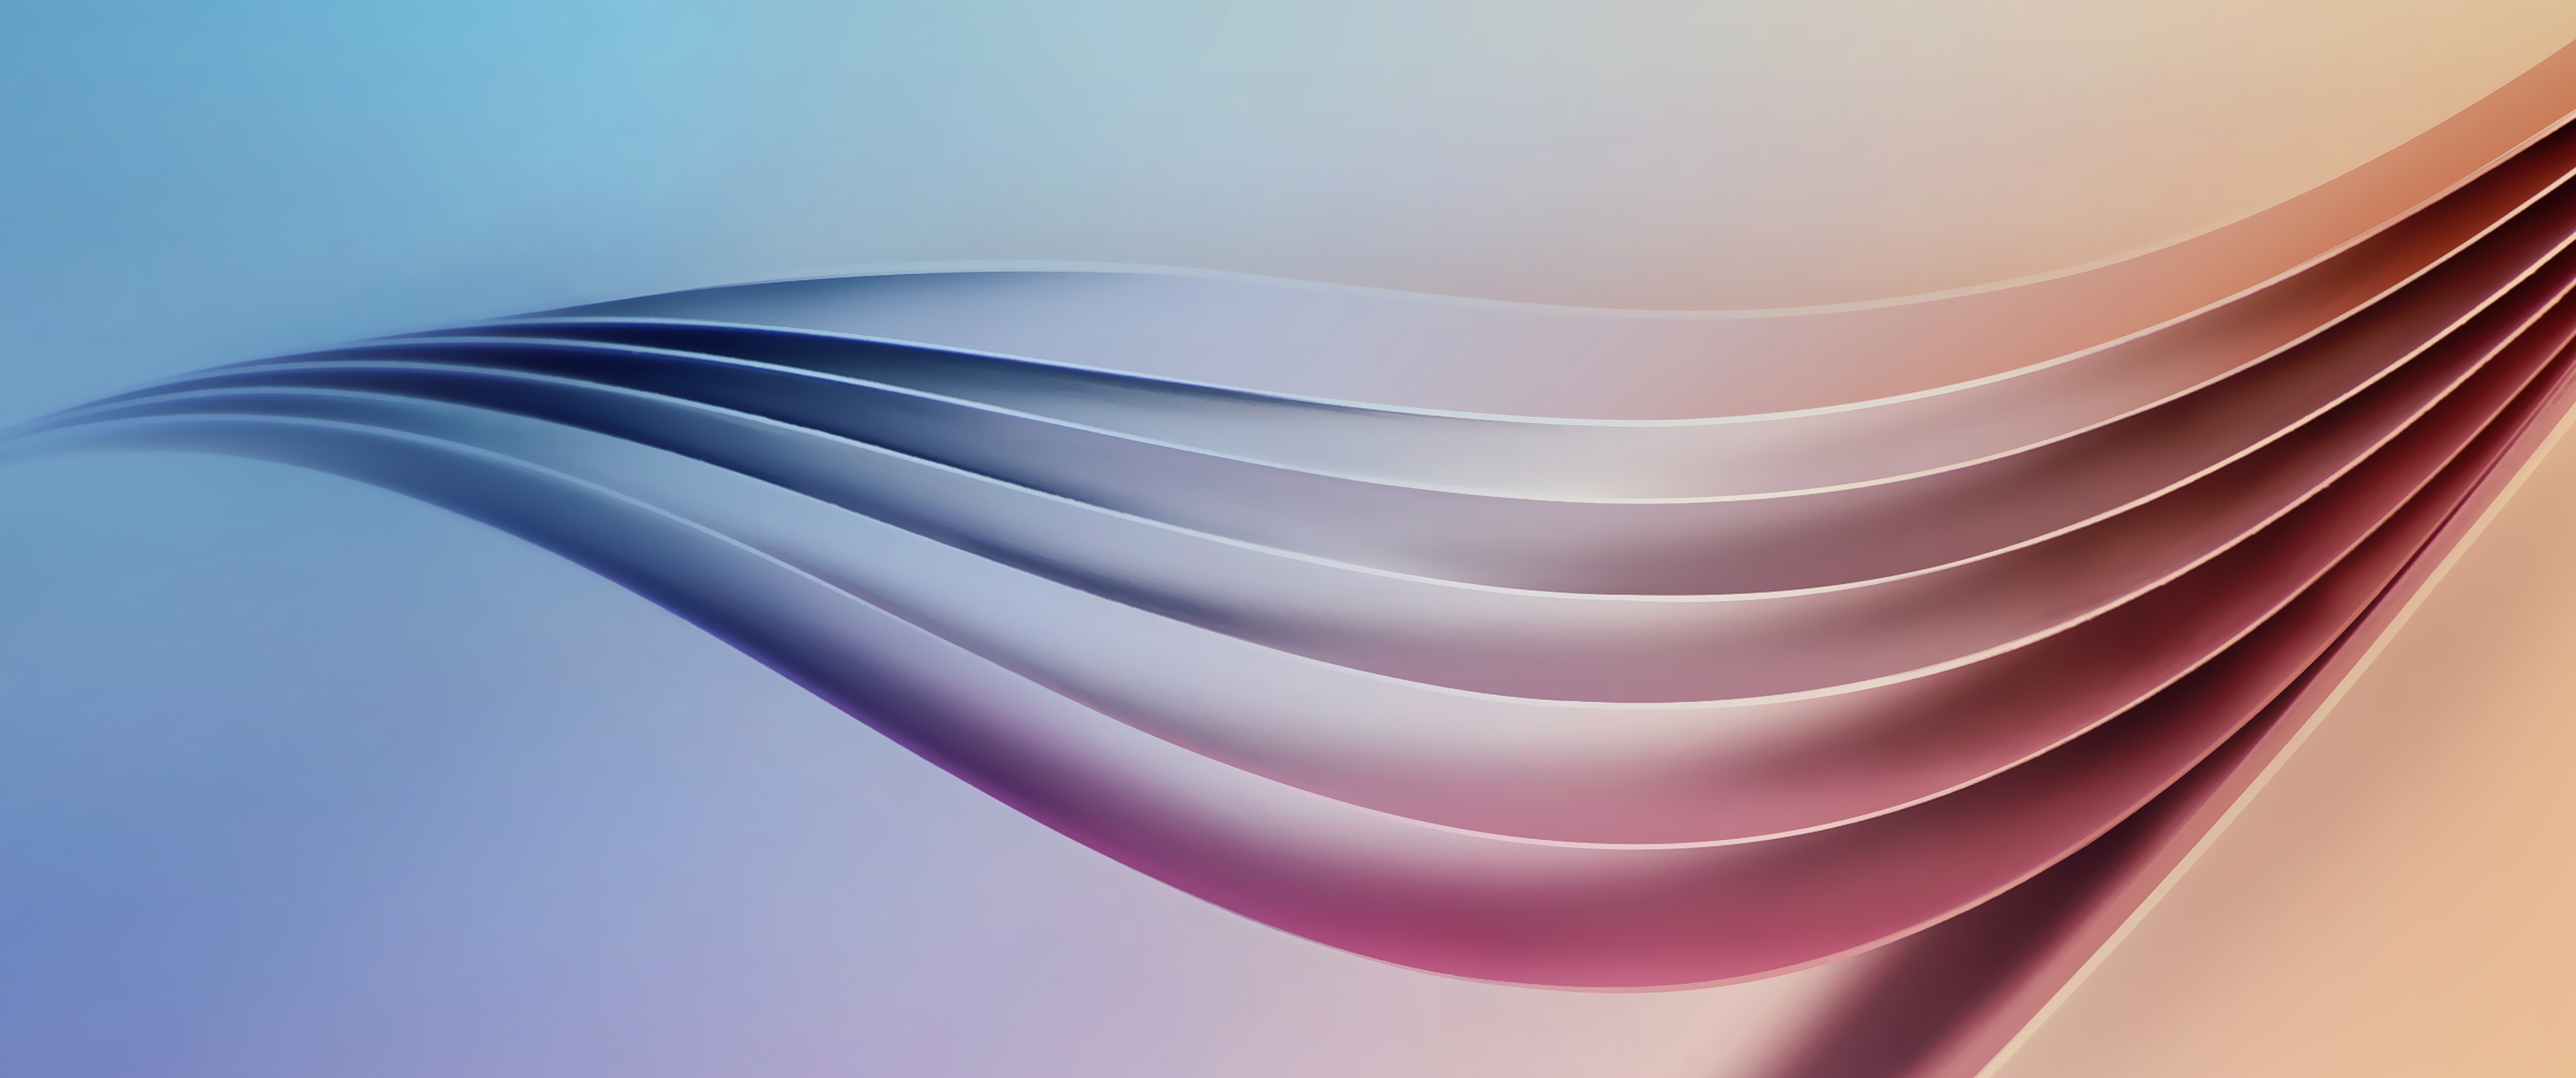 General 3440x1440 abstract shapes lines digital art gradient